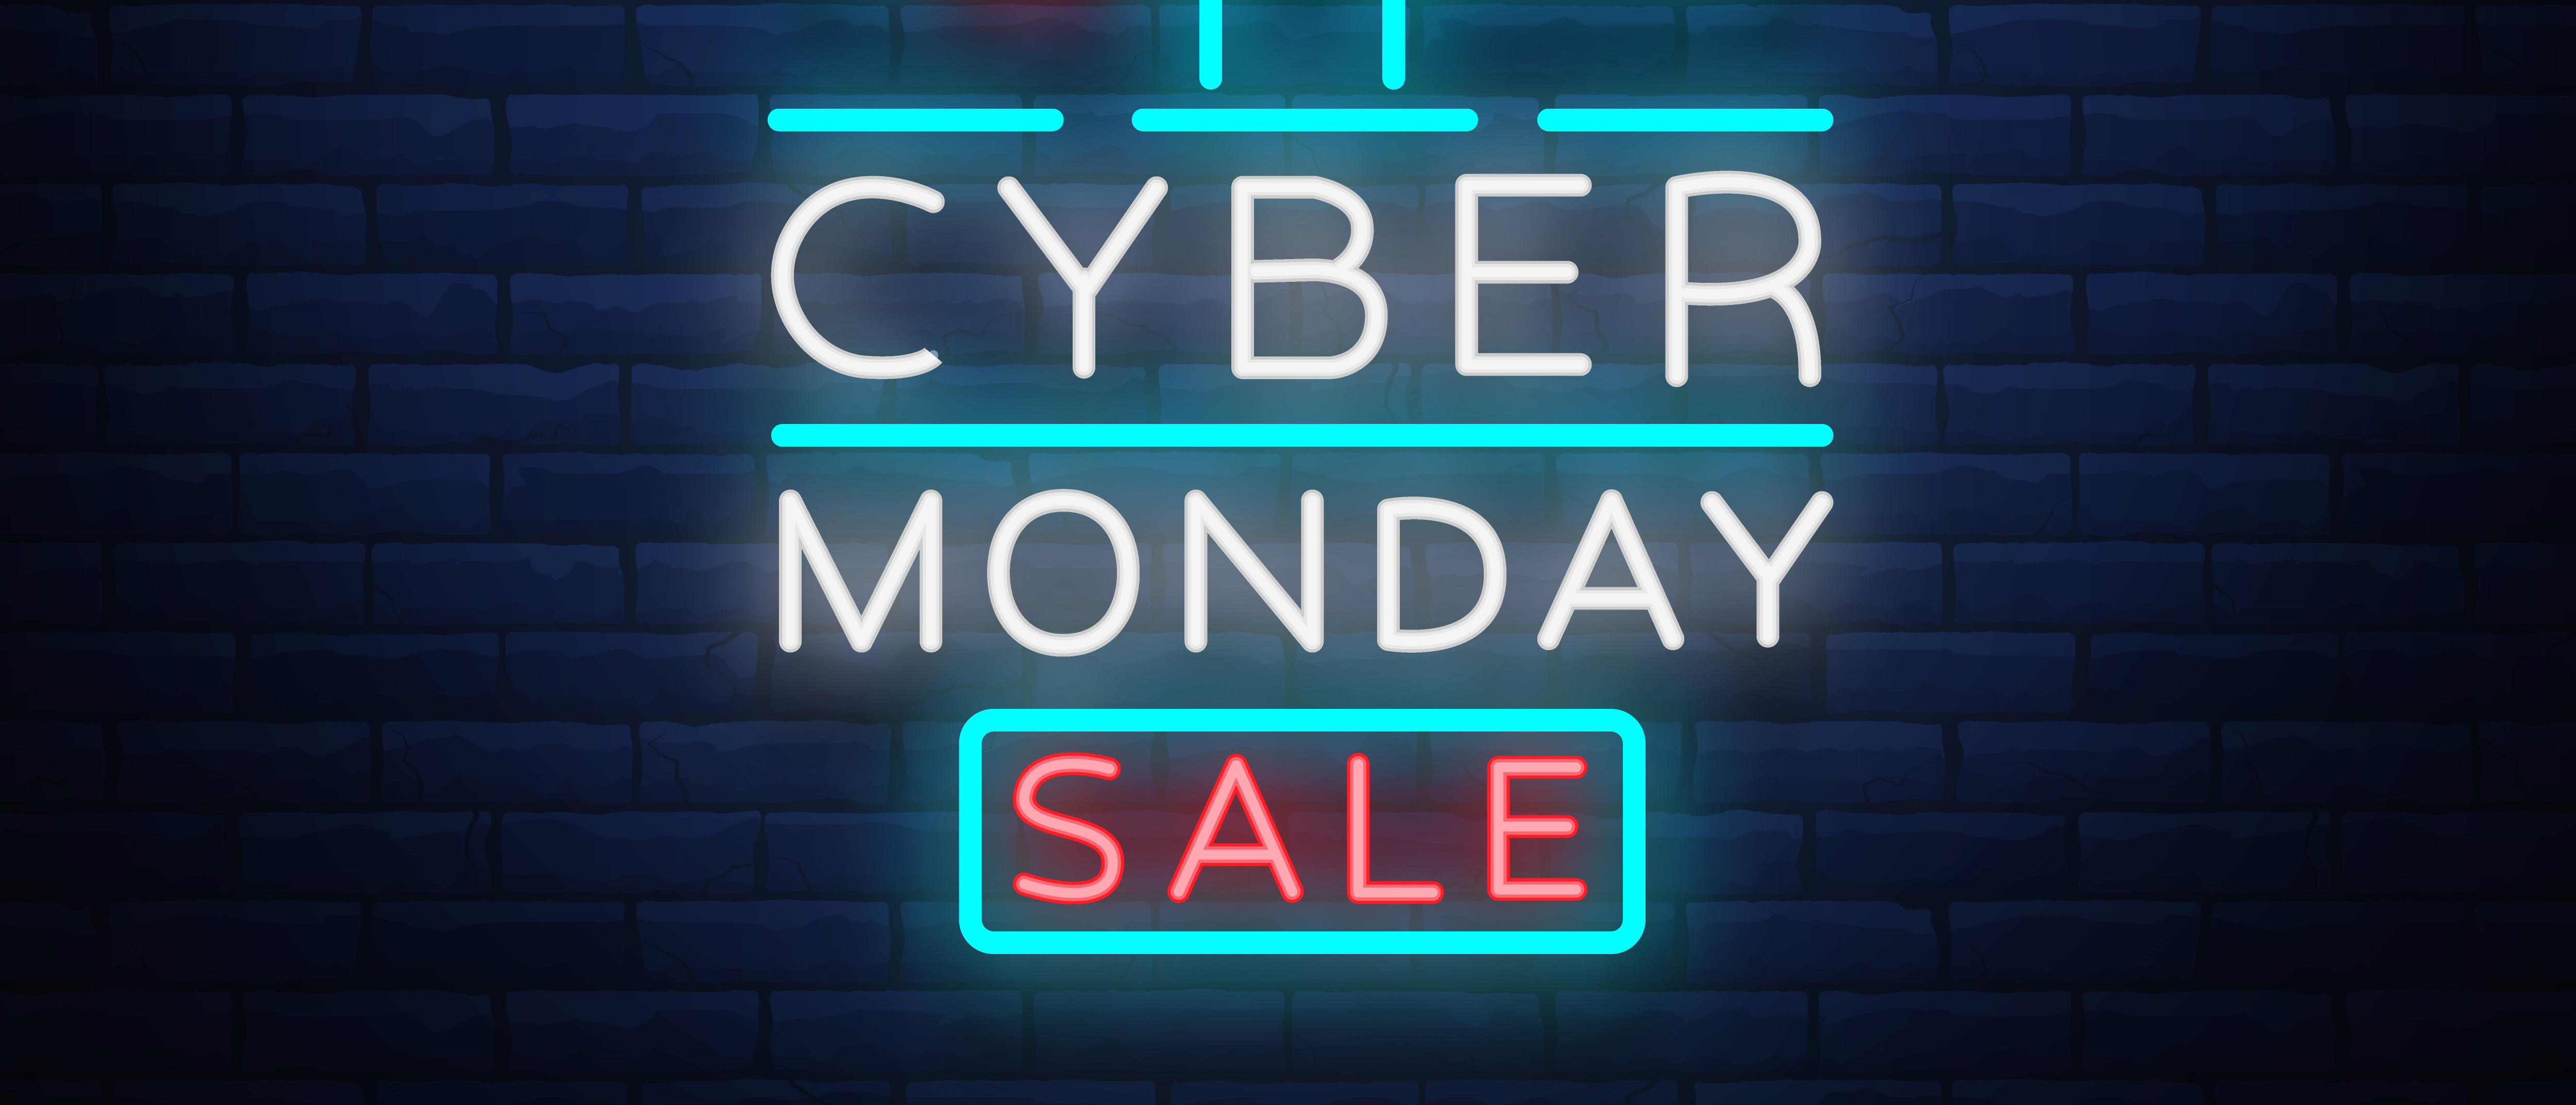 What Makes a Good Cyber Monday Marketing Strategy? | PATH81